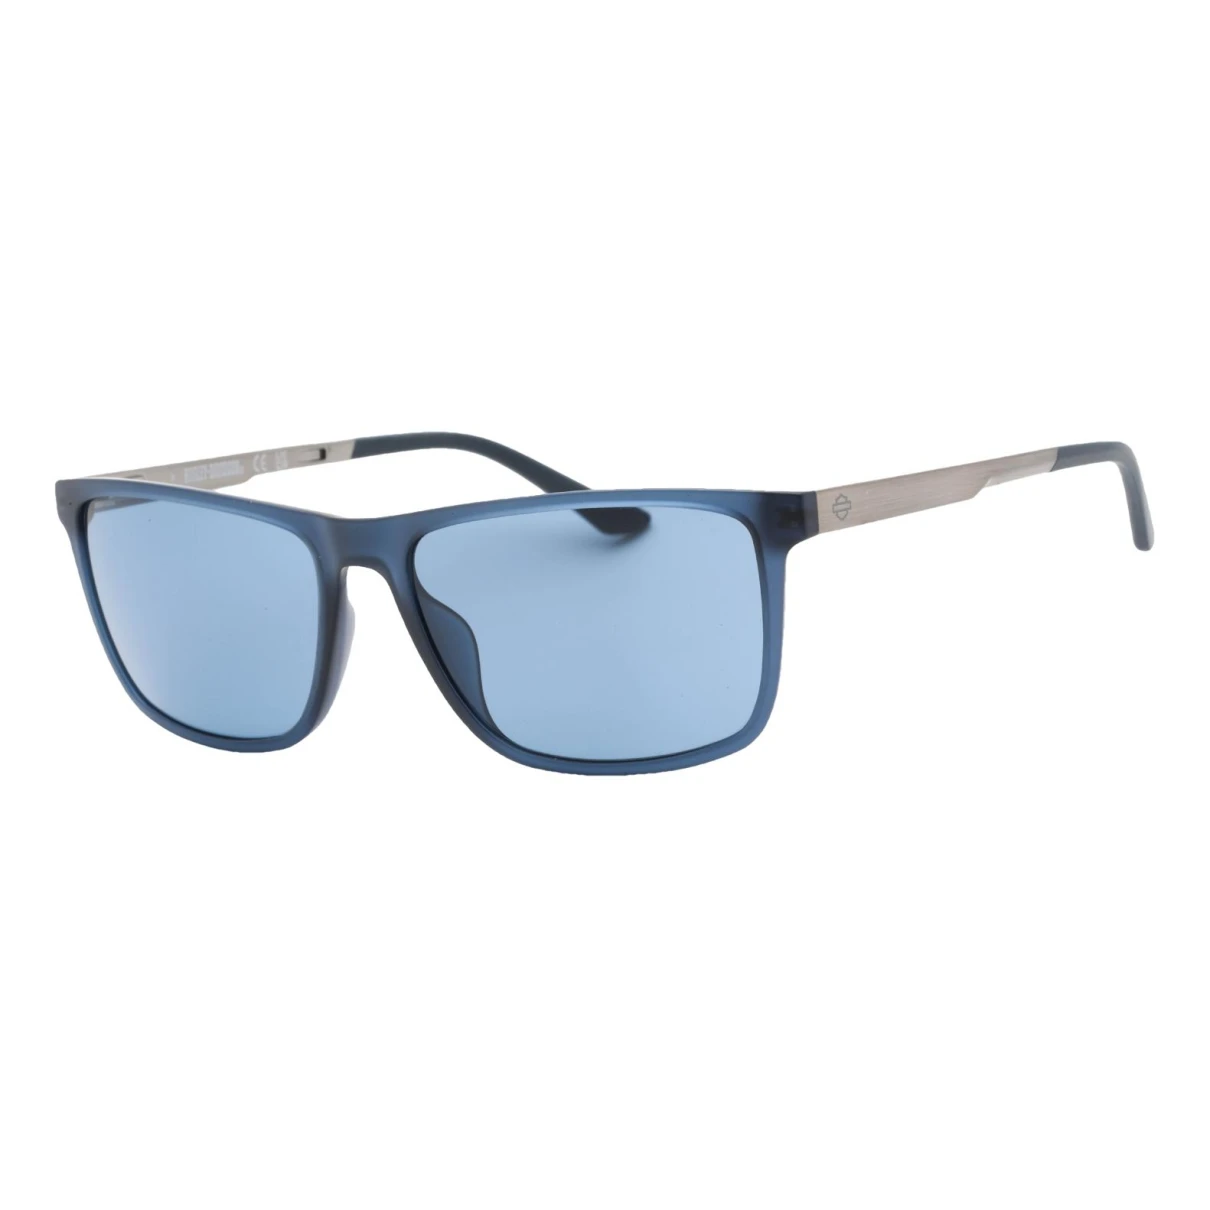 Pre-owned Harley Davidson Sunglasses In Blue